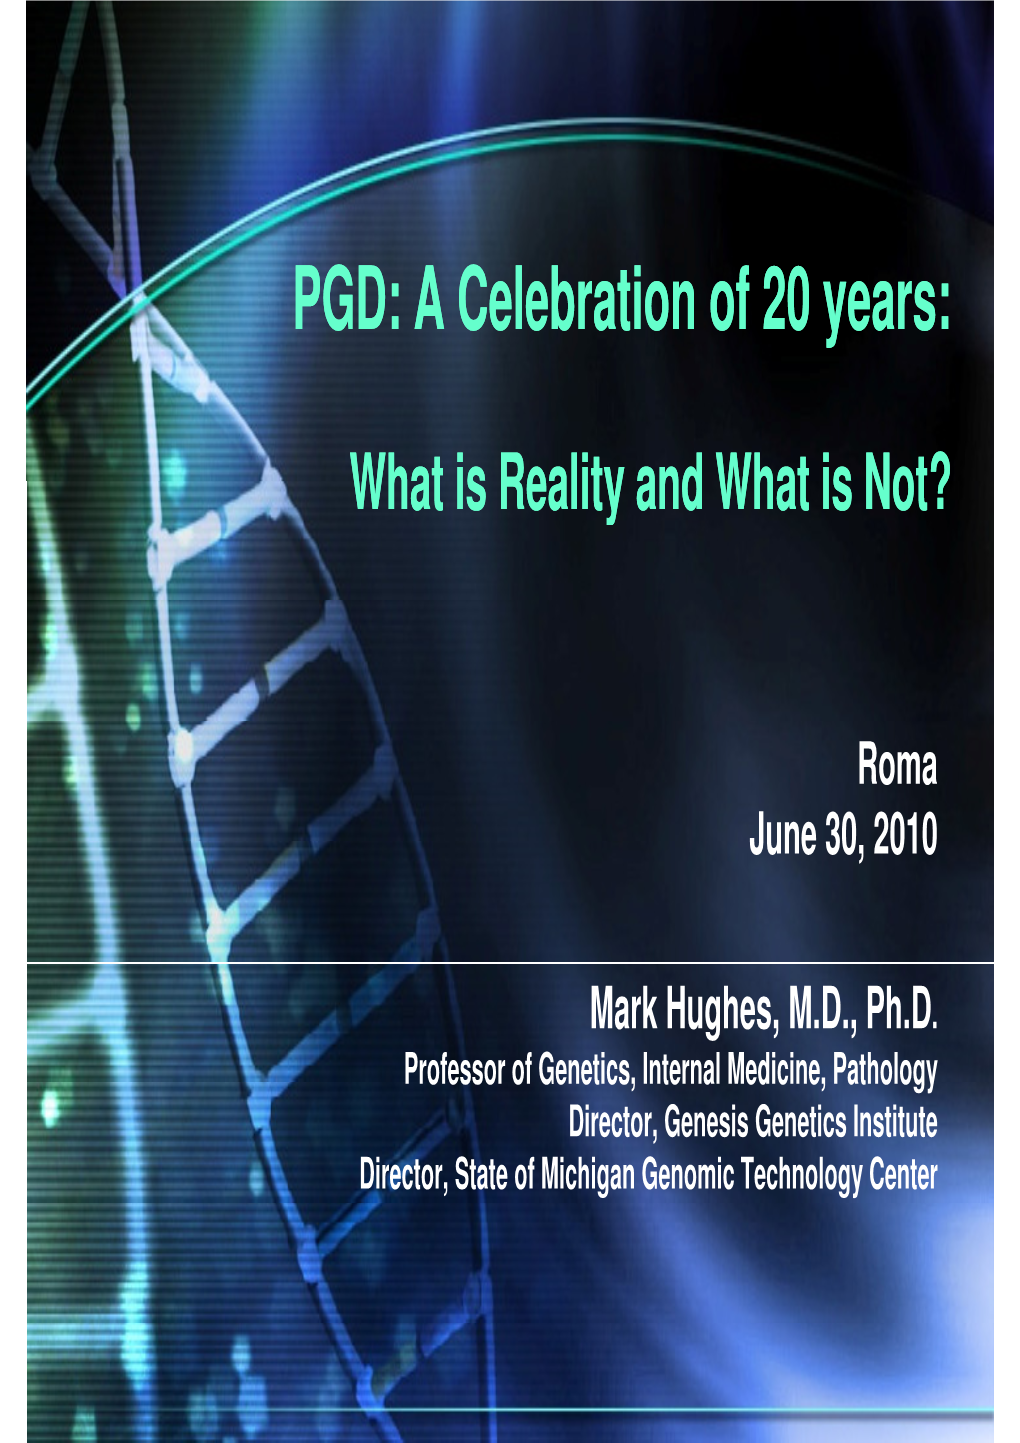 PGD: a Celebration of 20 Years